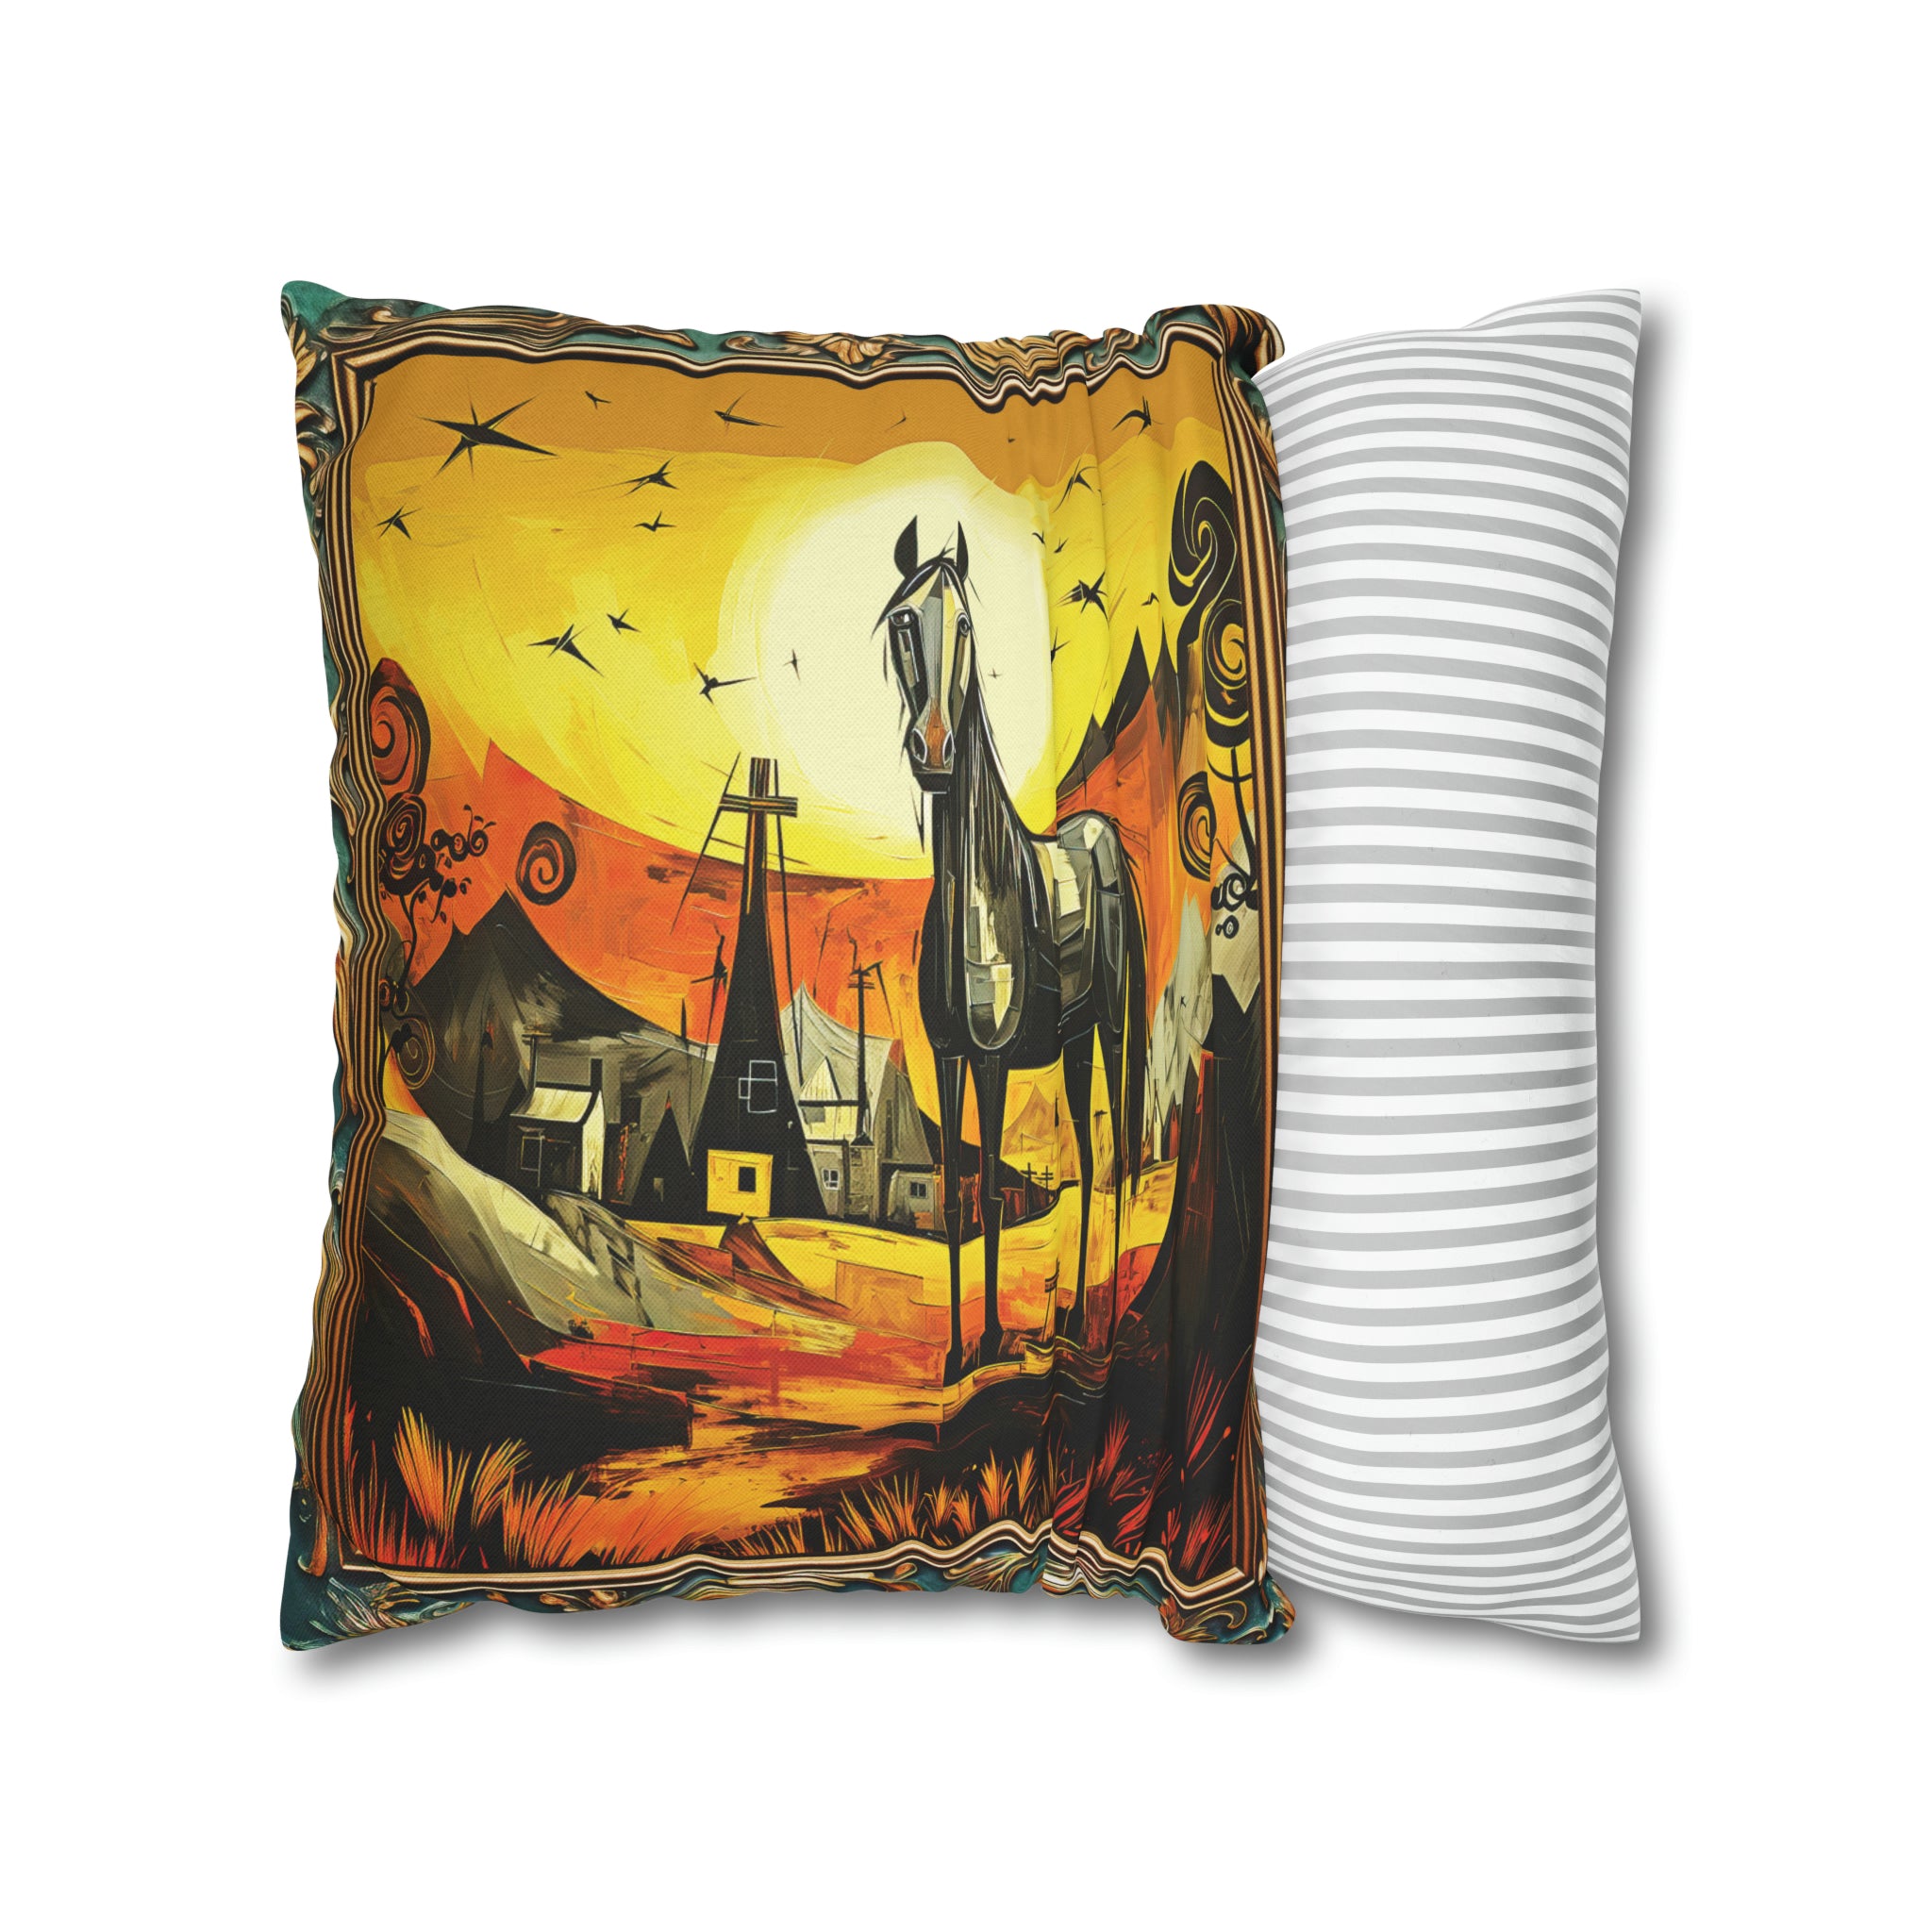 Square Pillow Case 18" x 18", CASE ONLY, no pillow form, original Art ,Colorful, Beautiful Abstract Black Horse at Sunset in a Western Village